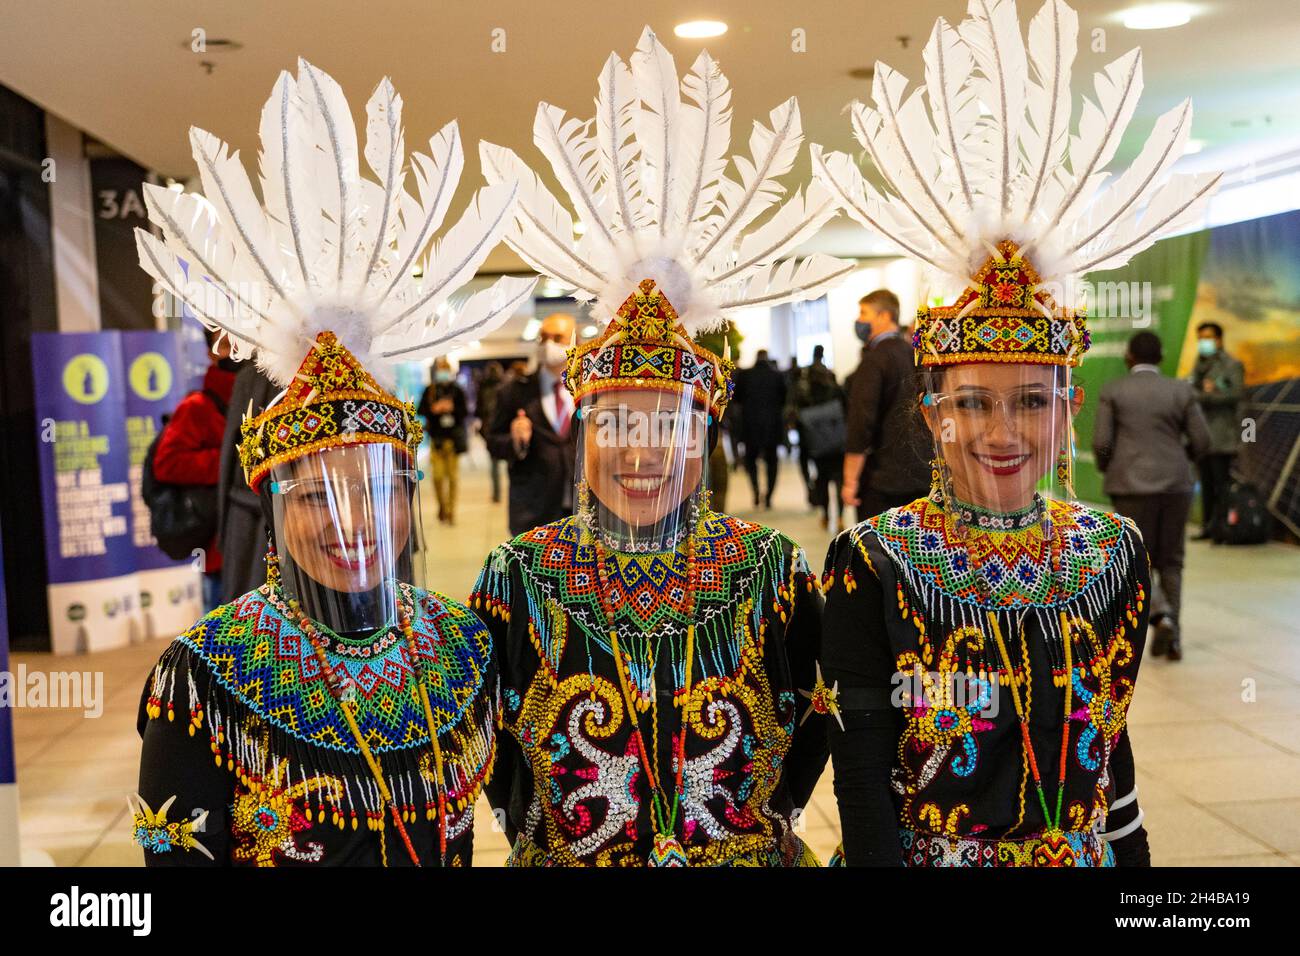 Glasgow, Scotland, UK. 1st November 2021. Images from Monday at the UN climate change conference in Glasgow. Pic; Three Indonesian females in traditional national costume with face shields at the COp26 venue.  Iain Masterton/Alamy Live News. Stock Photo